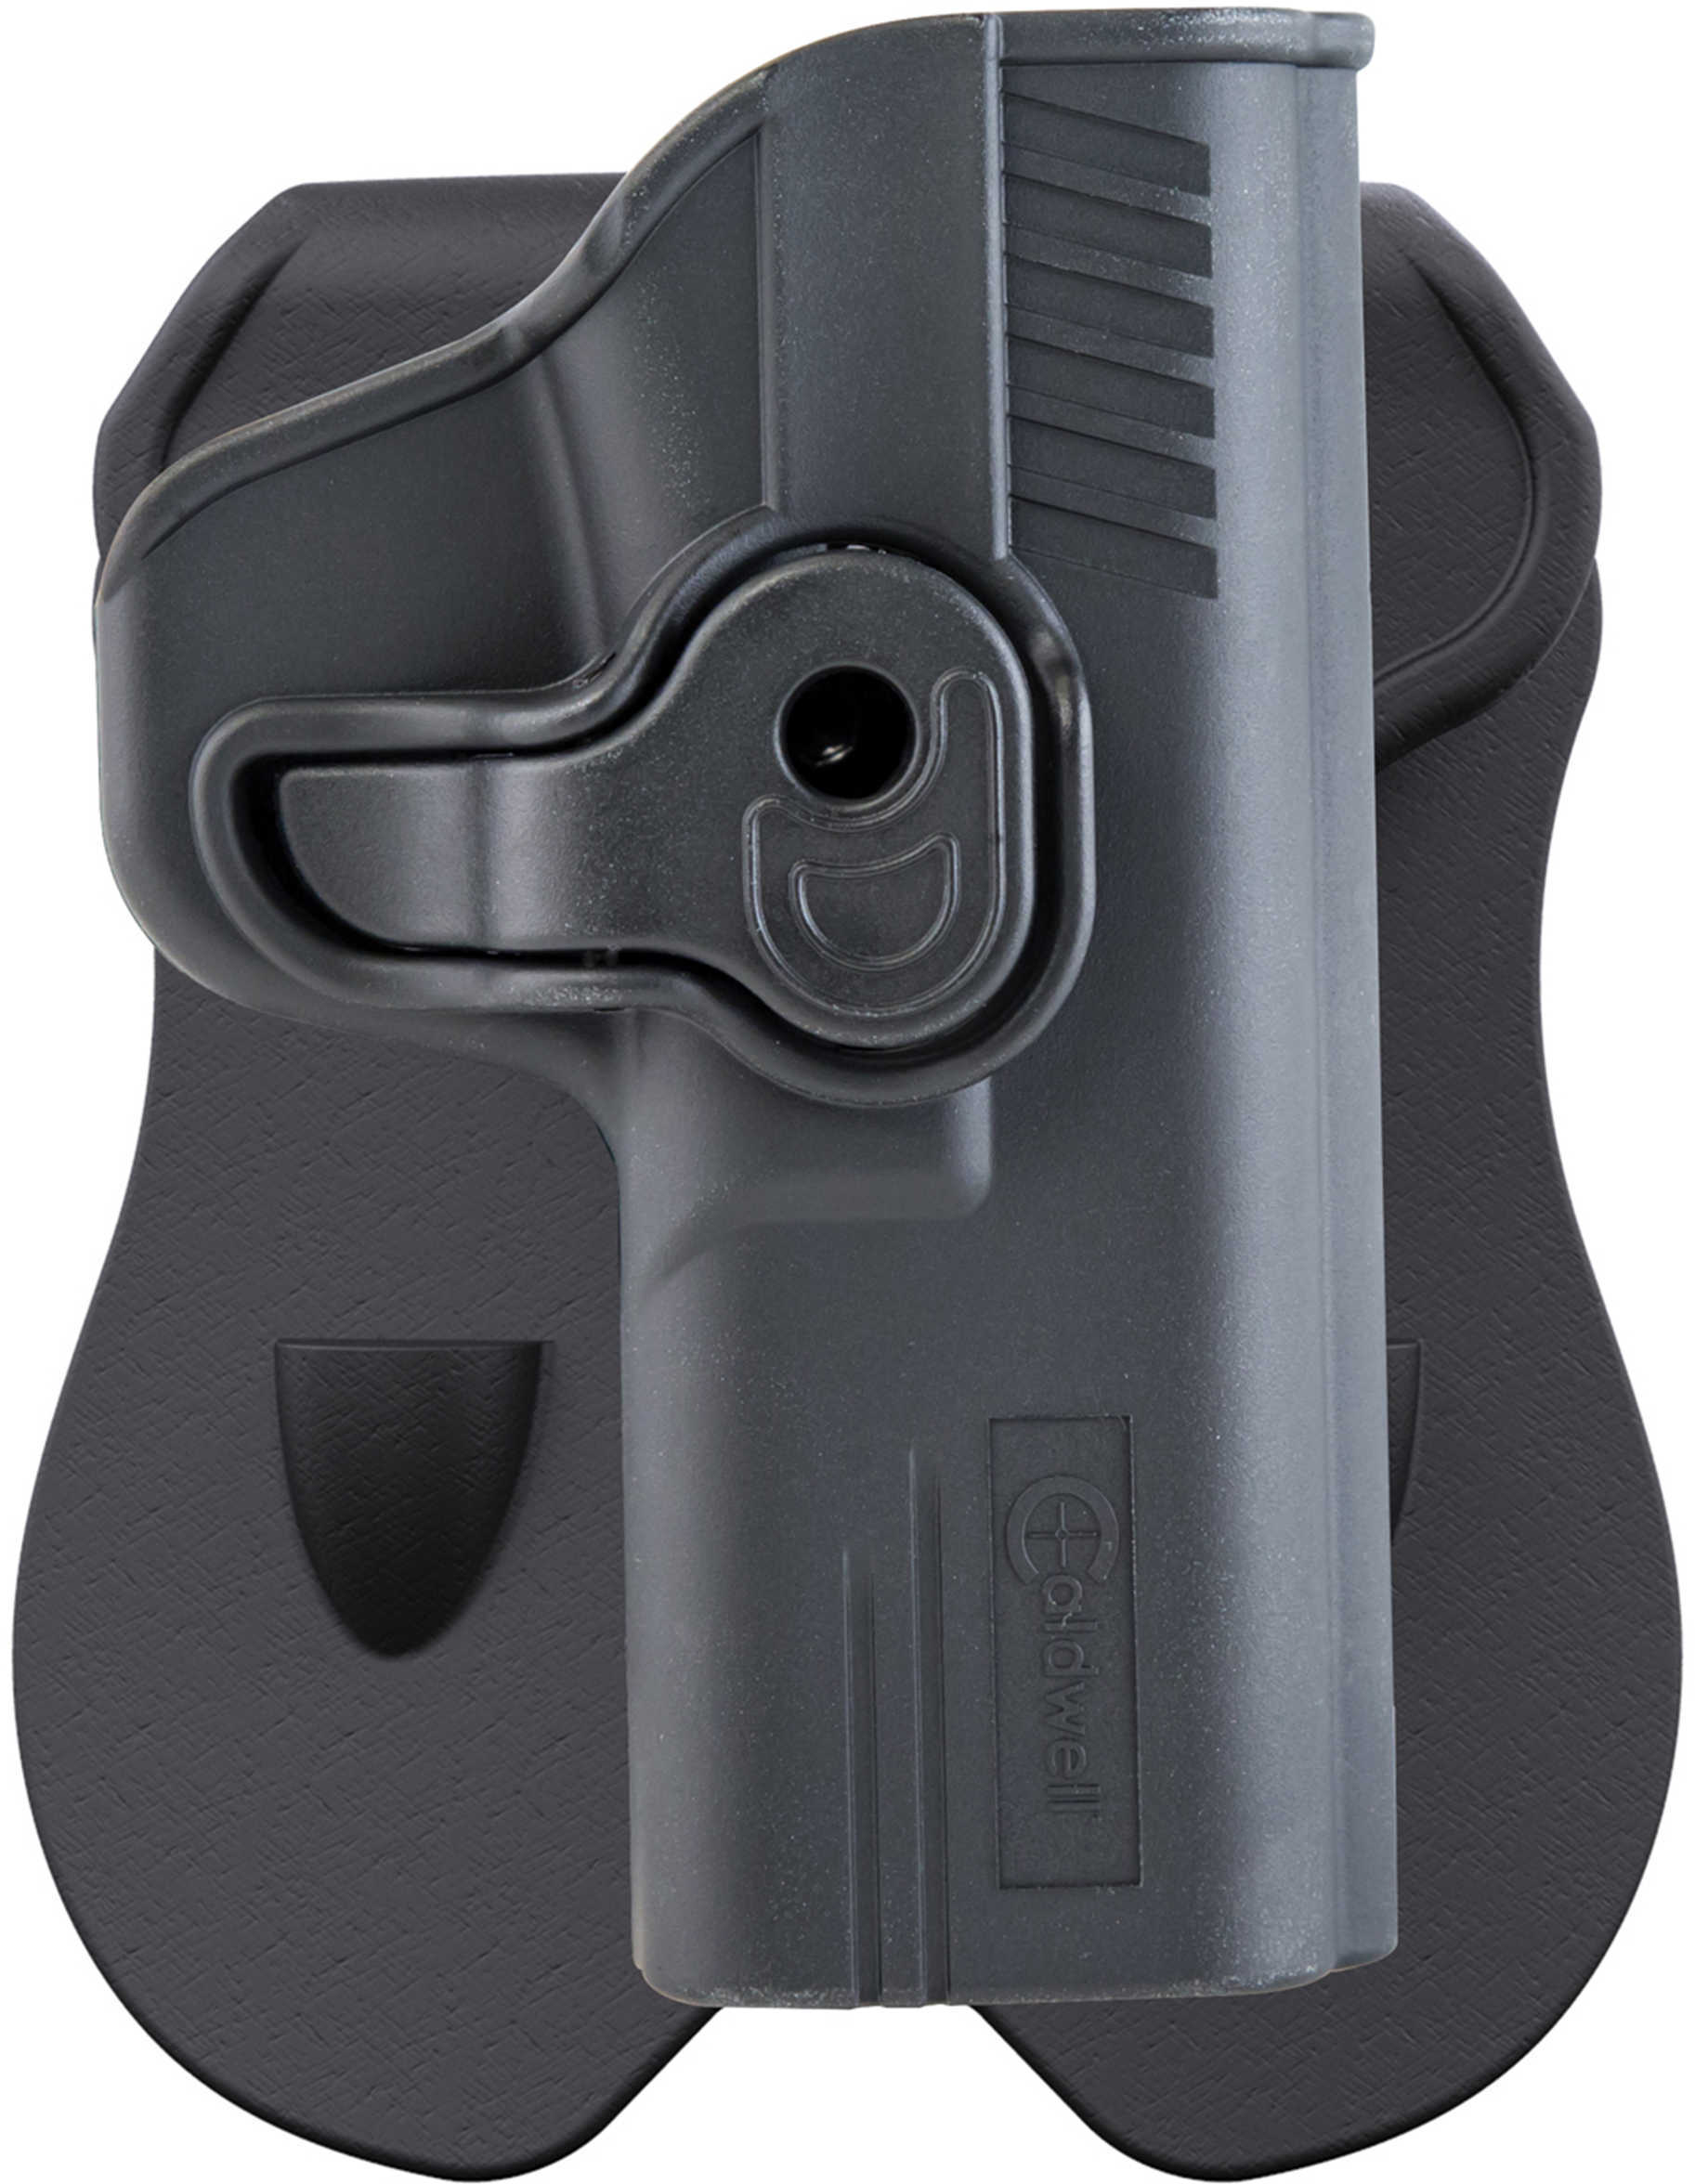 Caldwell Tac Ops Holster Taurus 24/7, Right Hand, Black Md: 110063